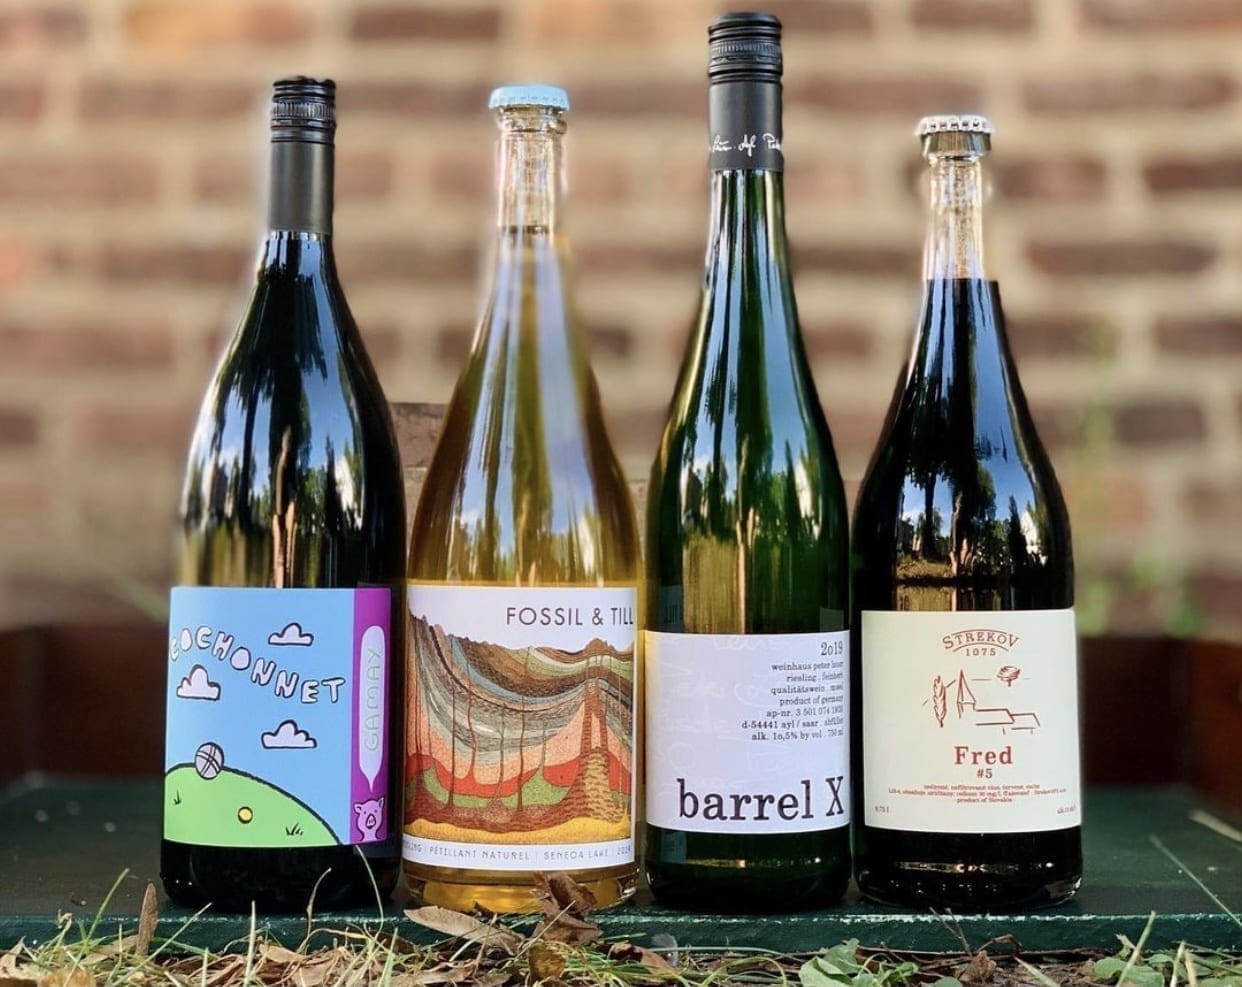 Where to Find Natural Wine in North Jersey (2021 Guide) New Jersey Digest